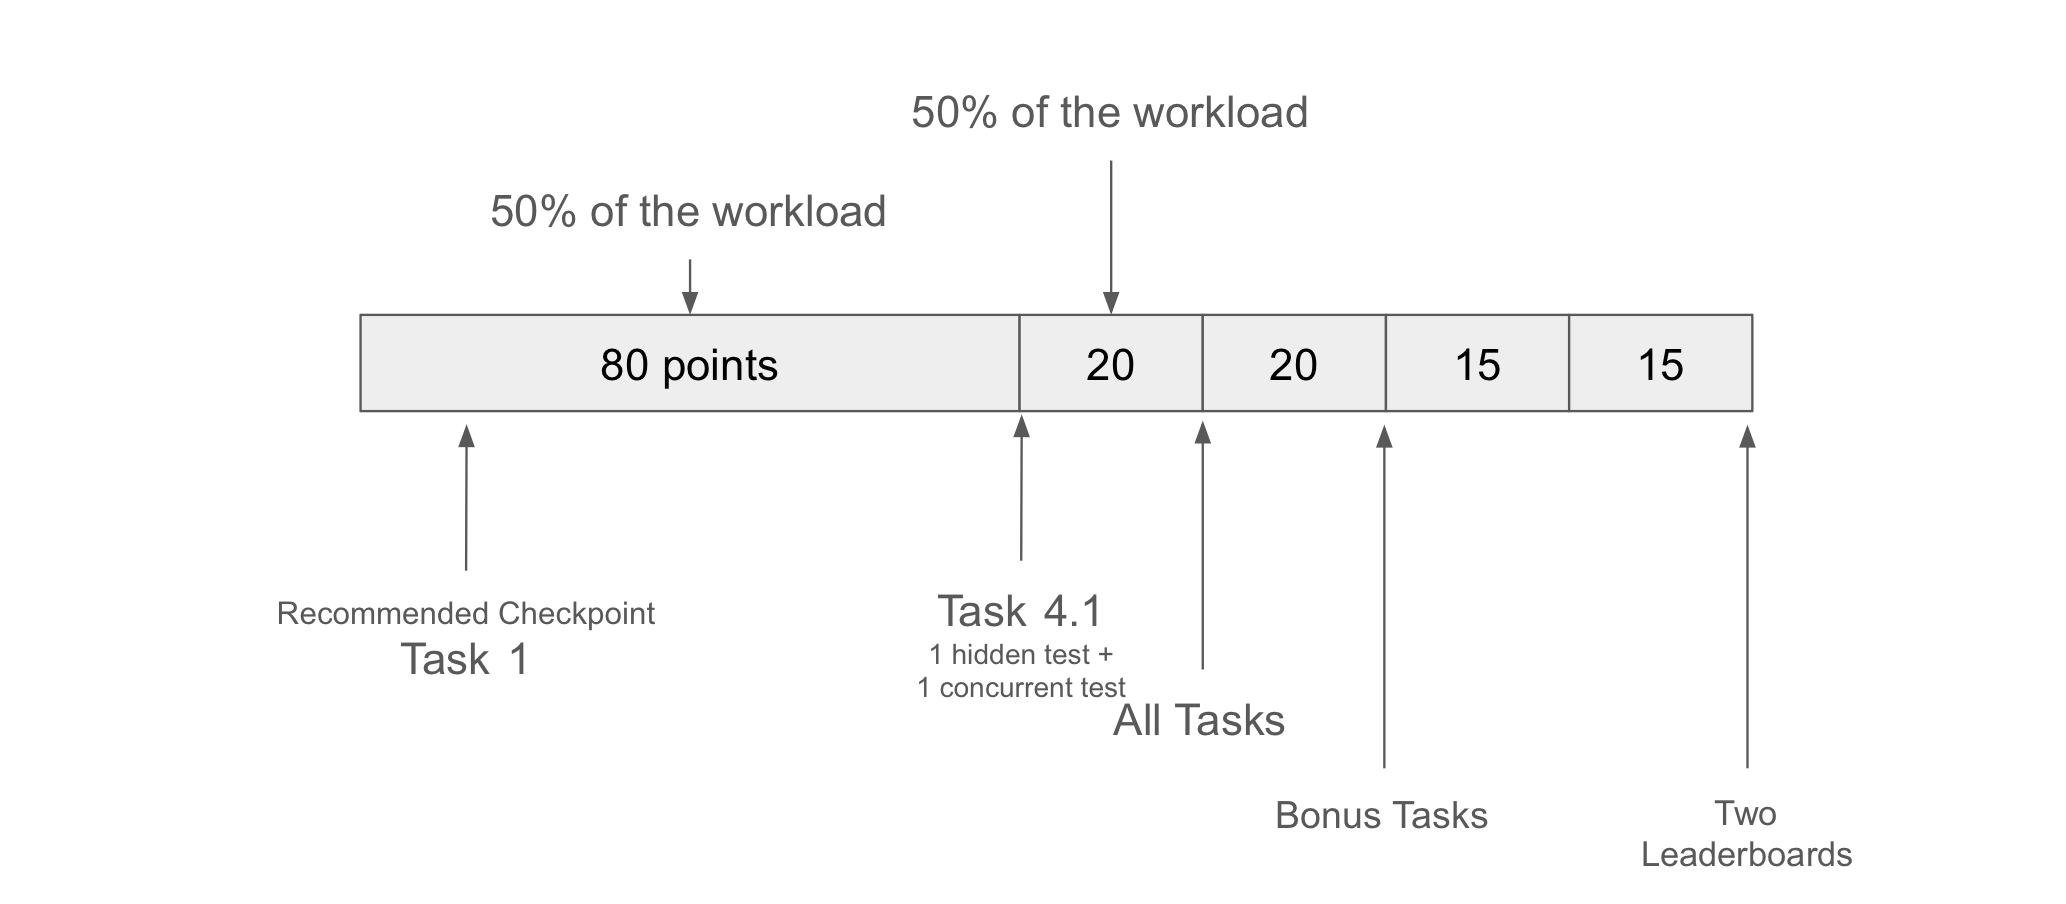 workload distribution of the project